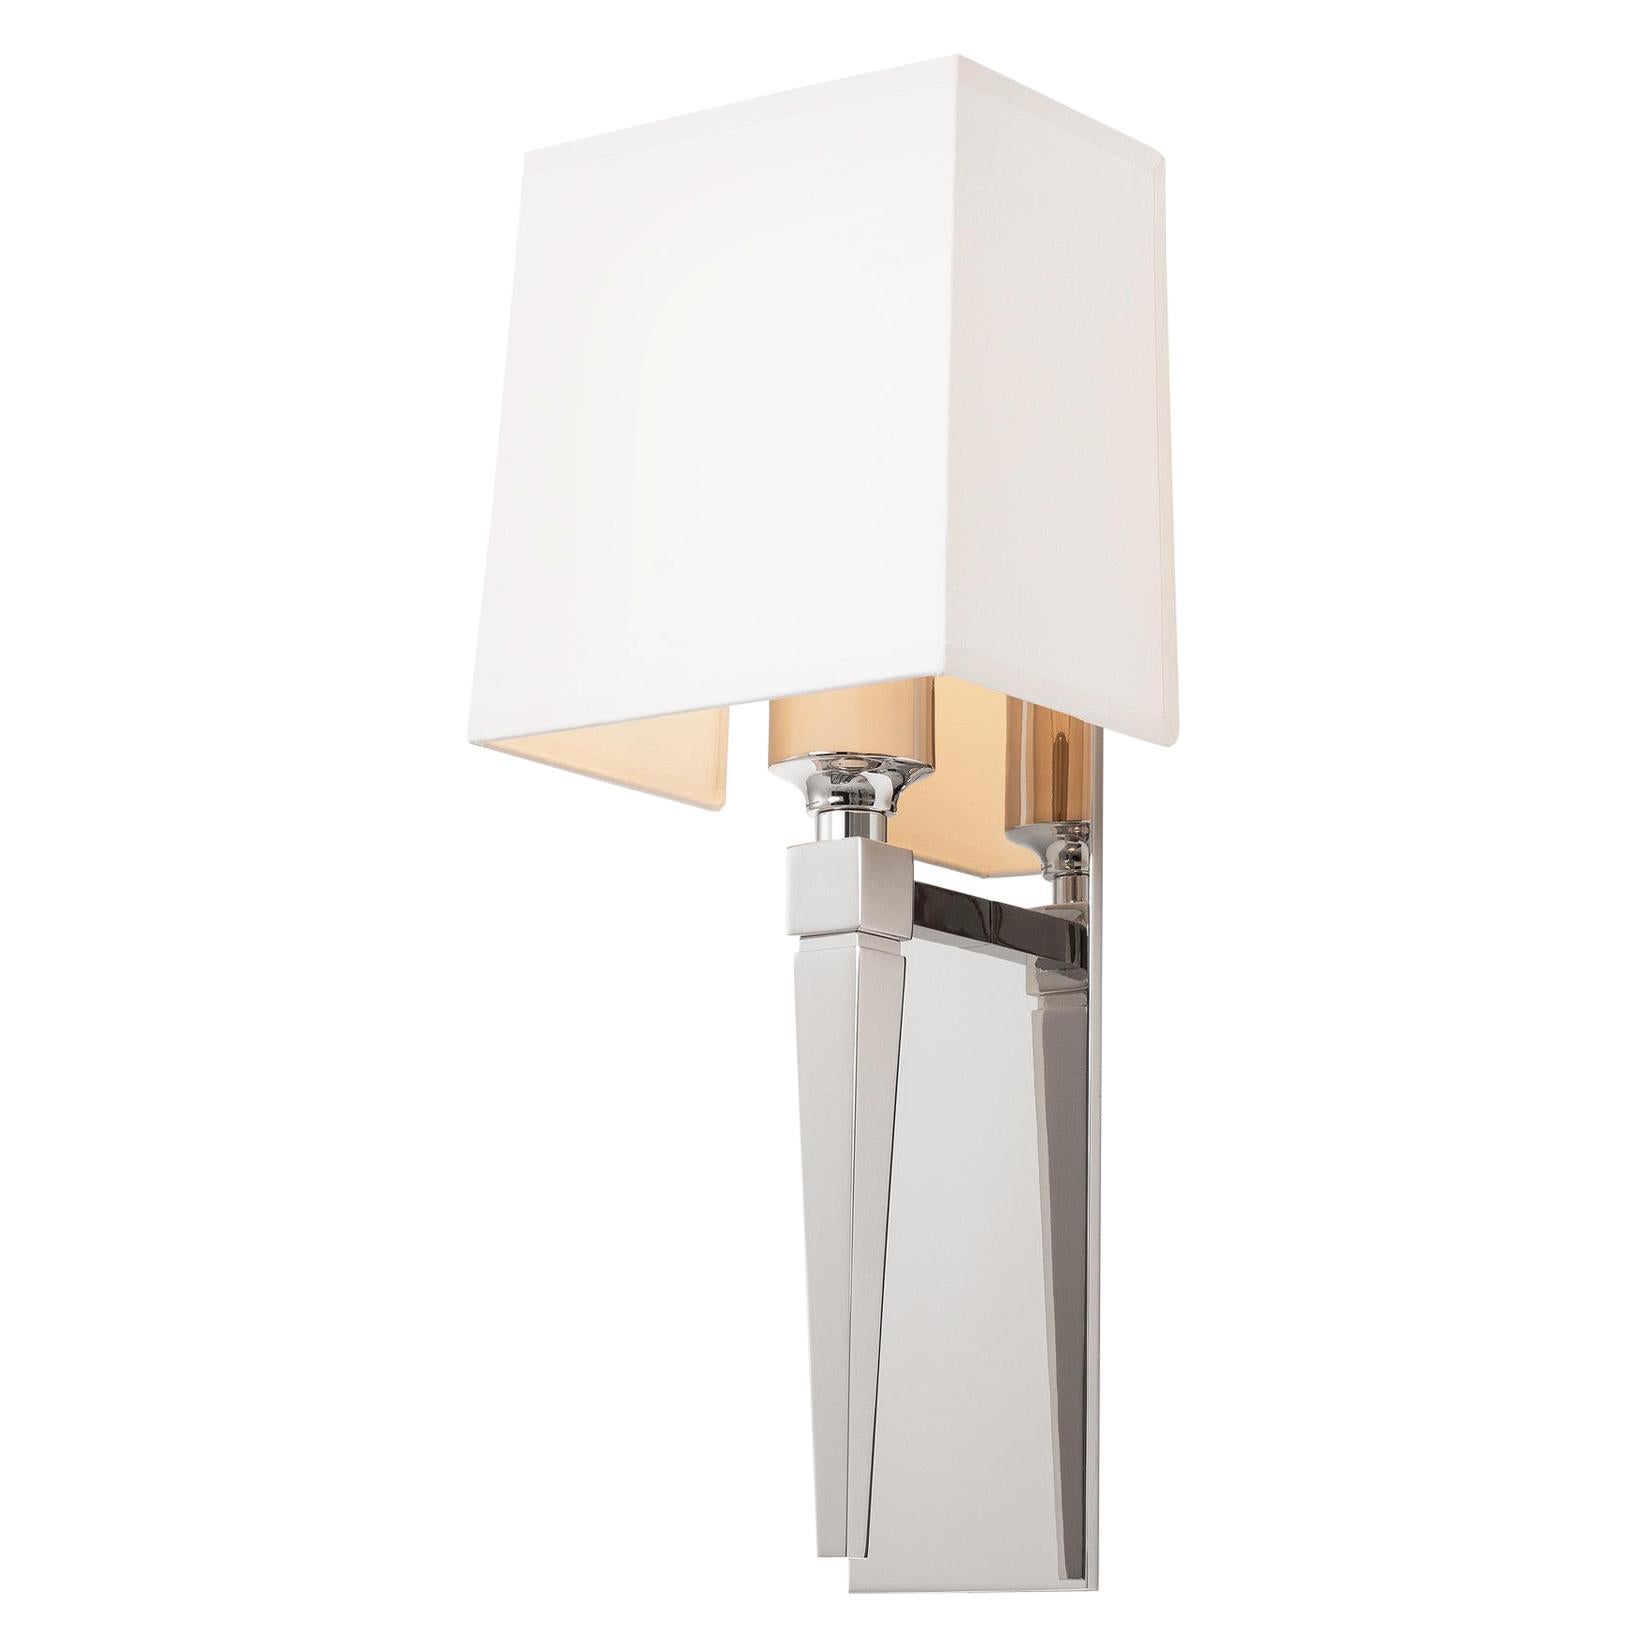 HOLLY HUNT Paris Sconce with Polished Nickel and Aquarelle Shade